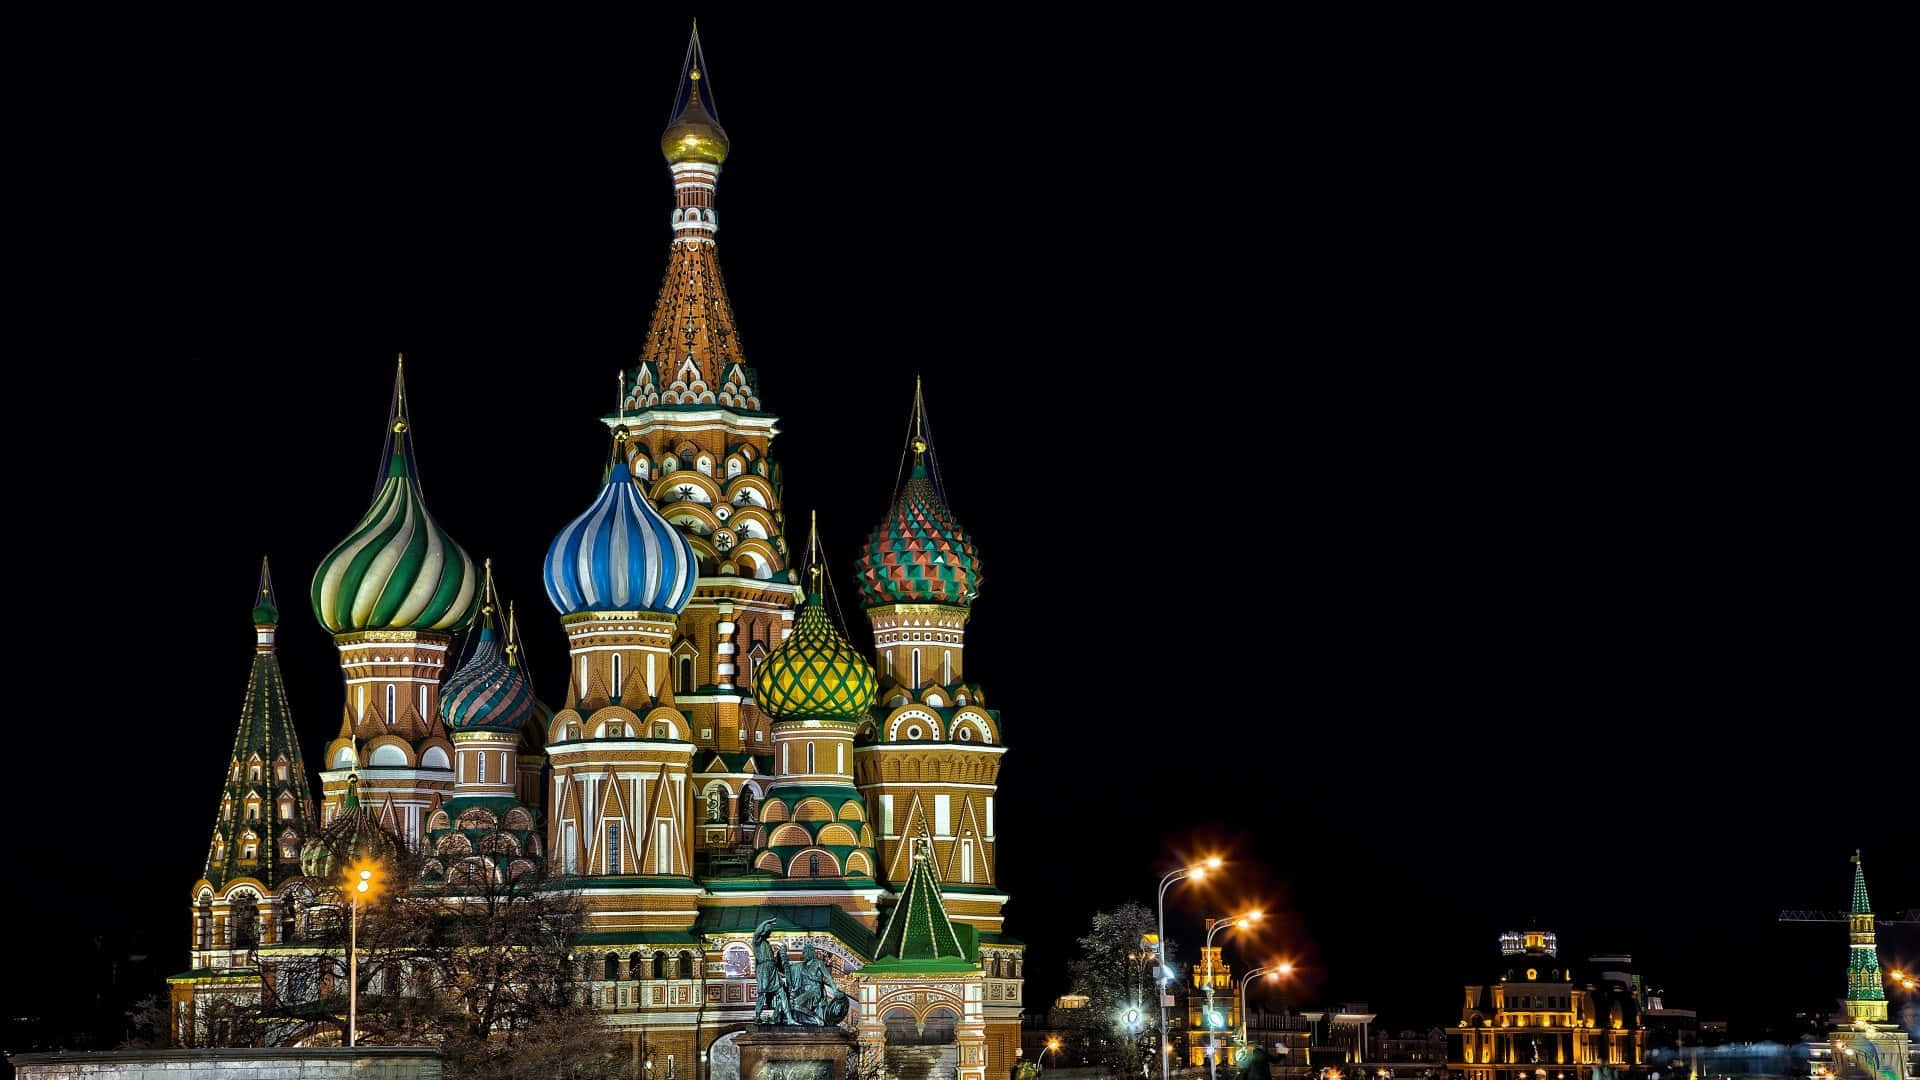 Saint Basils Cathedral In The Nighttime Wallpaper